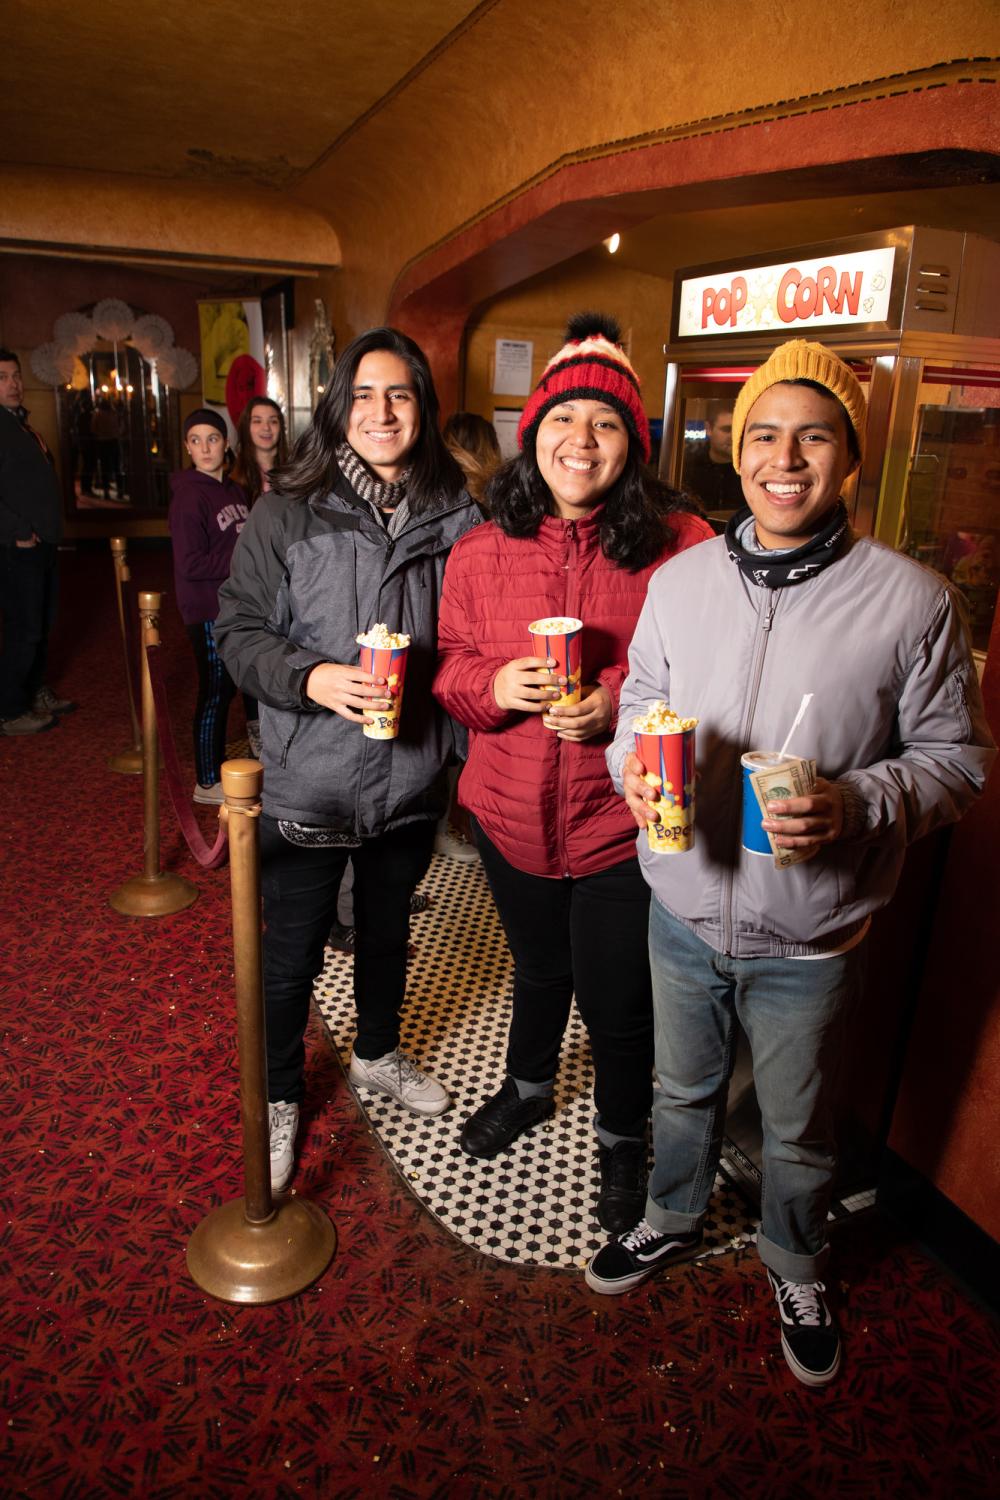 Three people stand in a movie theater lobby, smiling and holding buckets of popcorn.